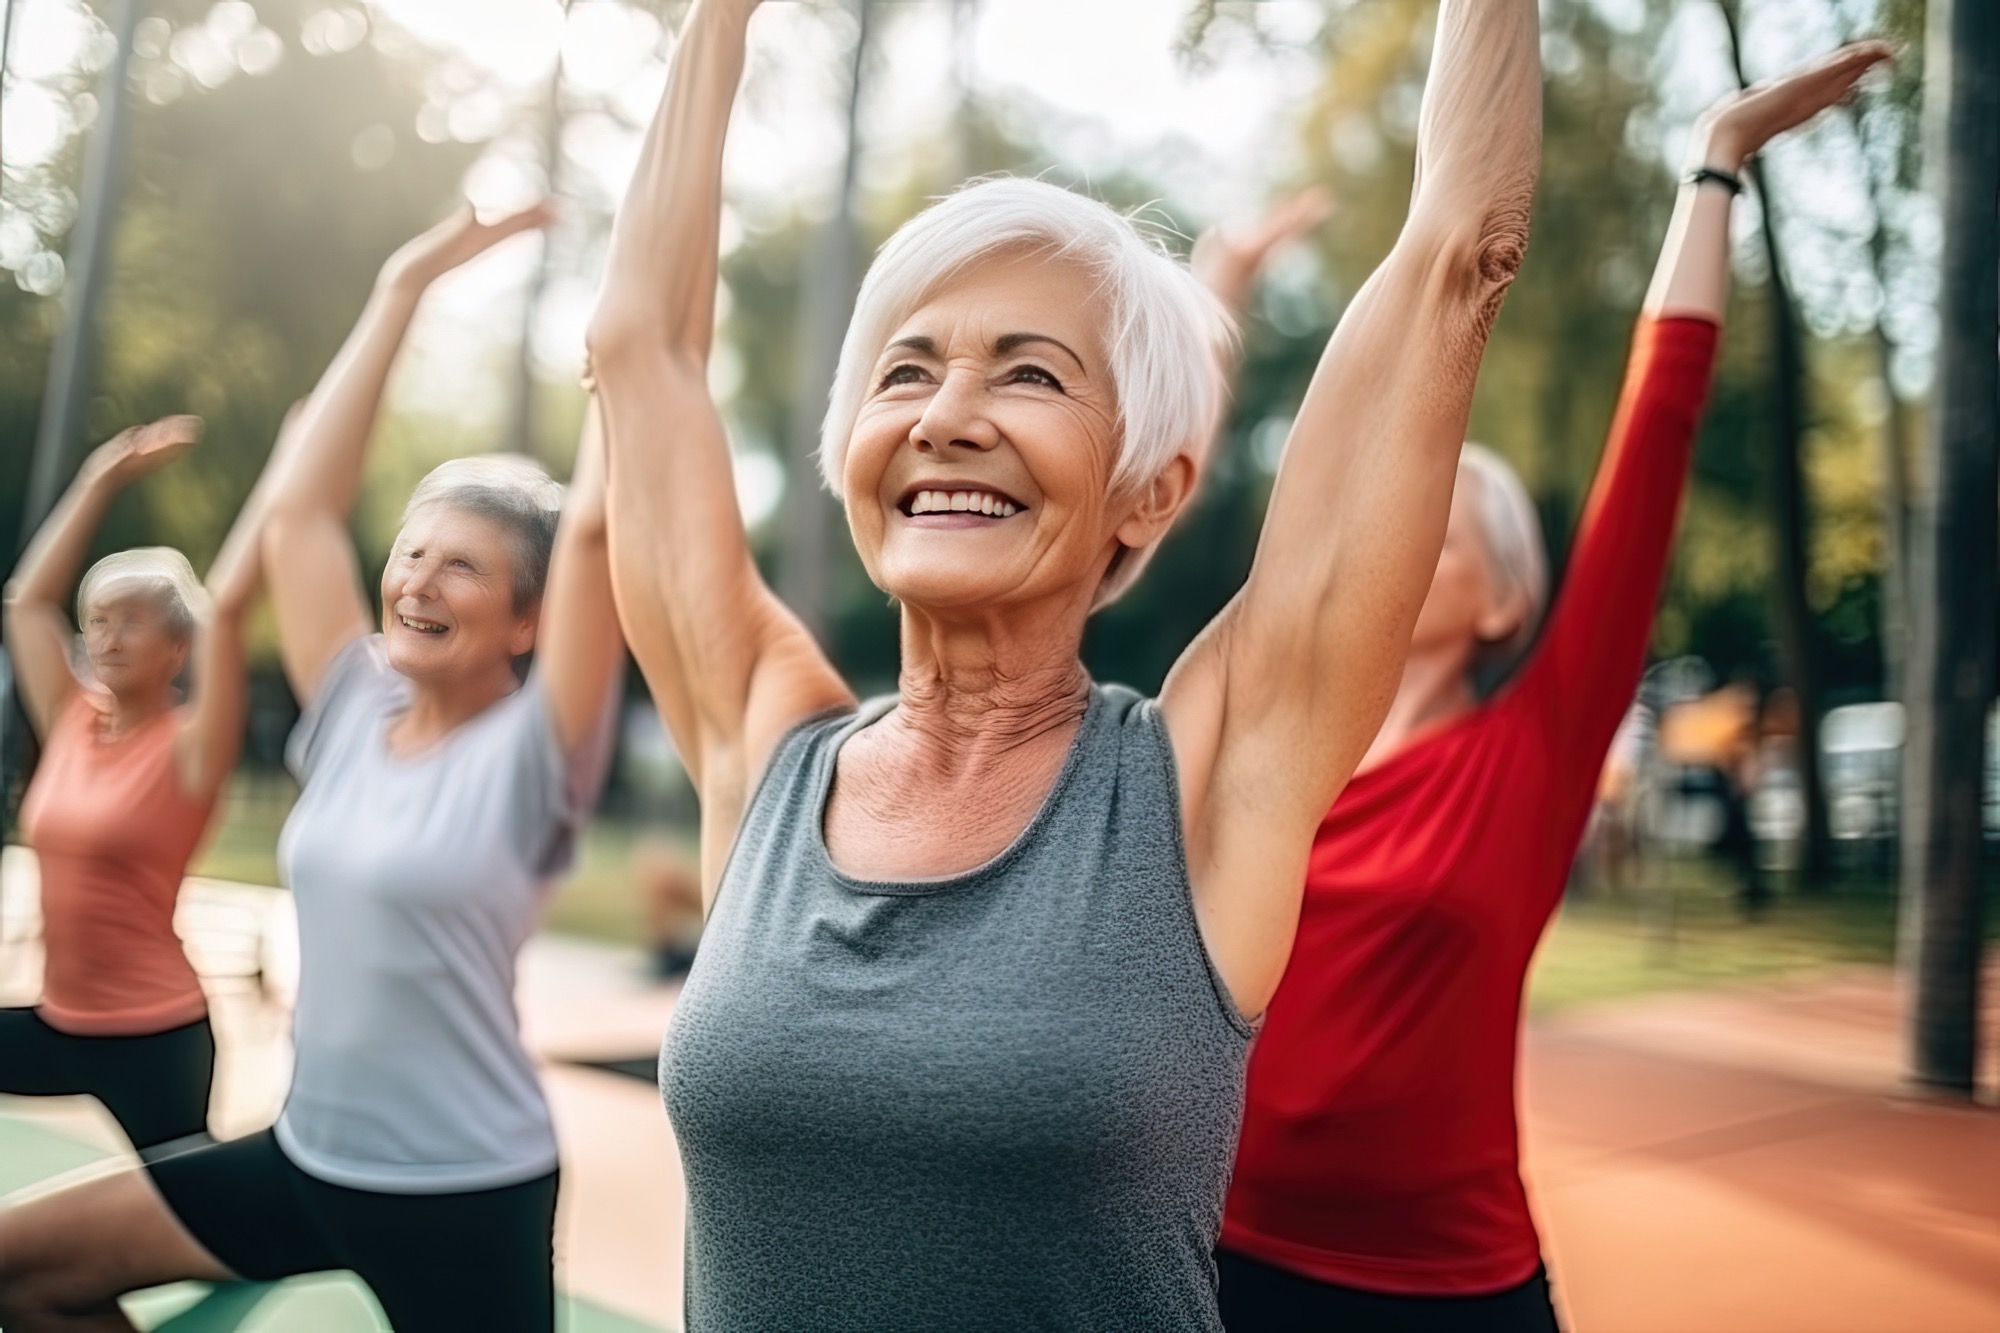 Women participating in a class that specializes in exercises for seniors improve their balance and core strength.